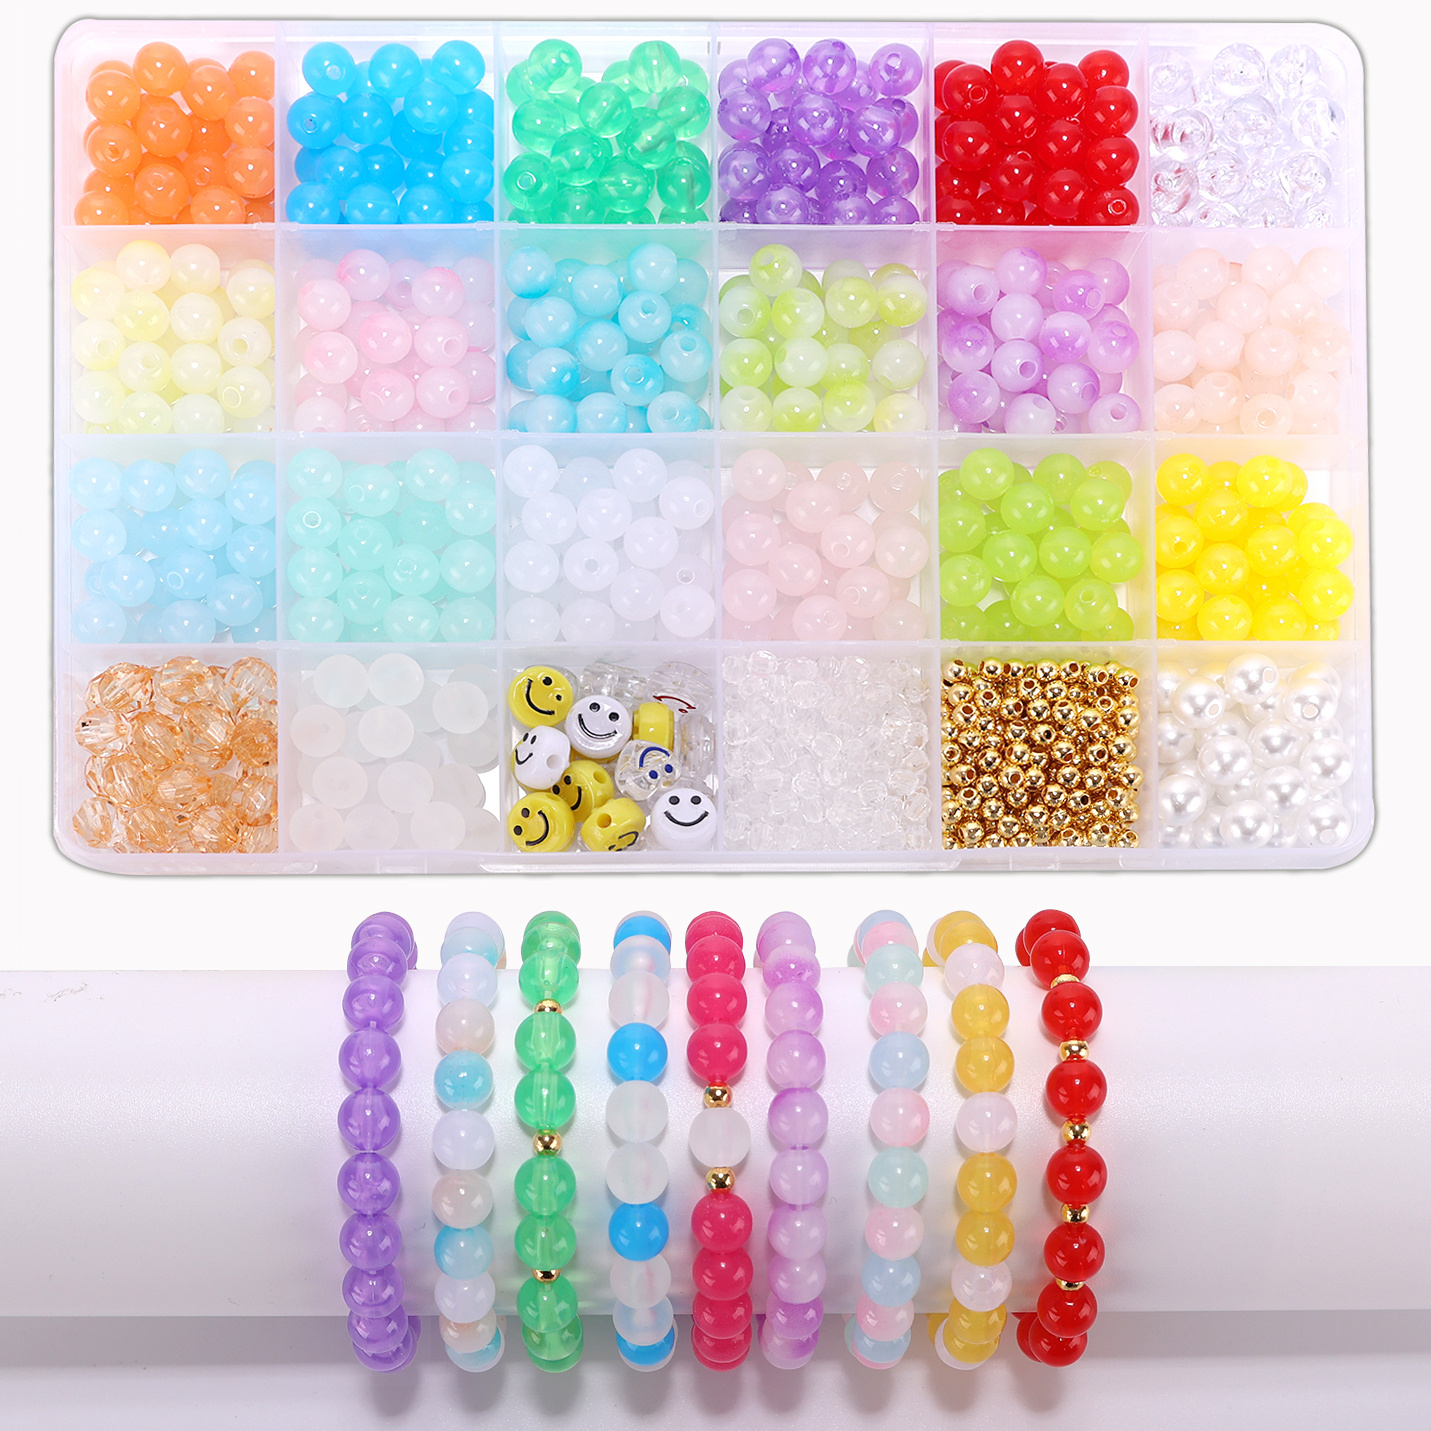 8mm Glass Beads for Jewelry Making Colorful Round Glass Beads Bracelet  Making Kit Crystal Gemstone Beads for DIY Craft Necklace Bracelet Earring  Phone